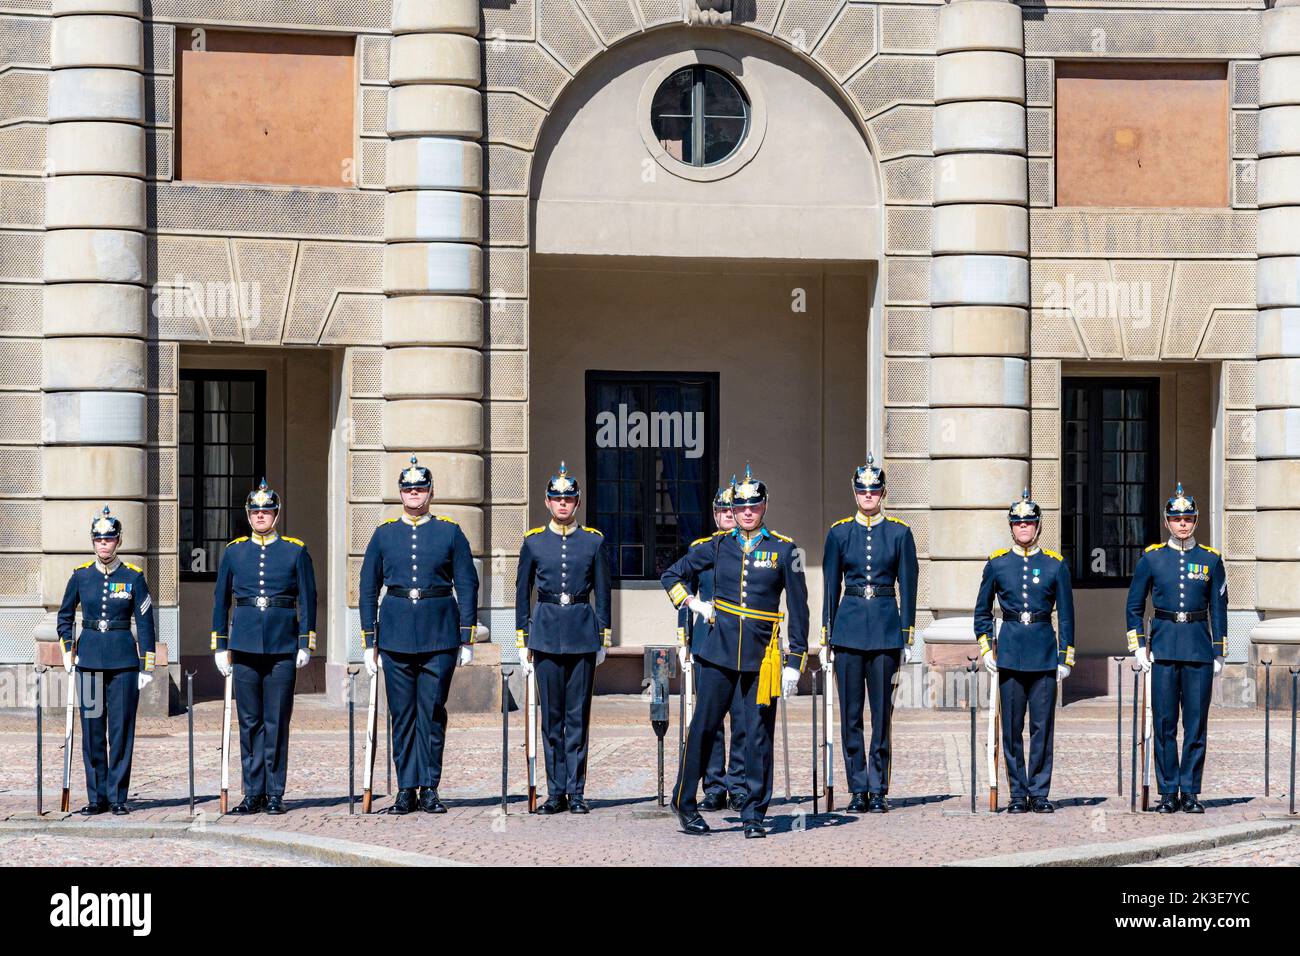 STOCKHOLM, SWEDEN - JULY 31, 2022: Guards at the royal palace in the gamla stan area of the city. Stock Photo